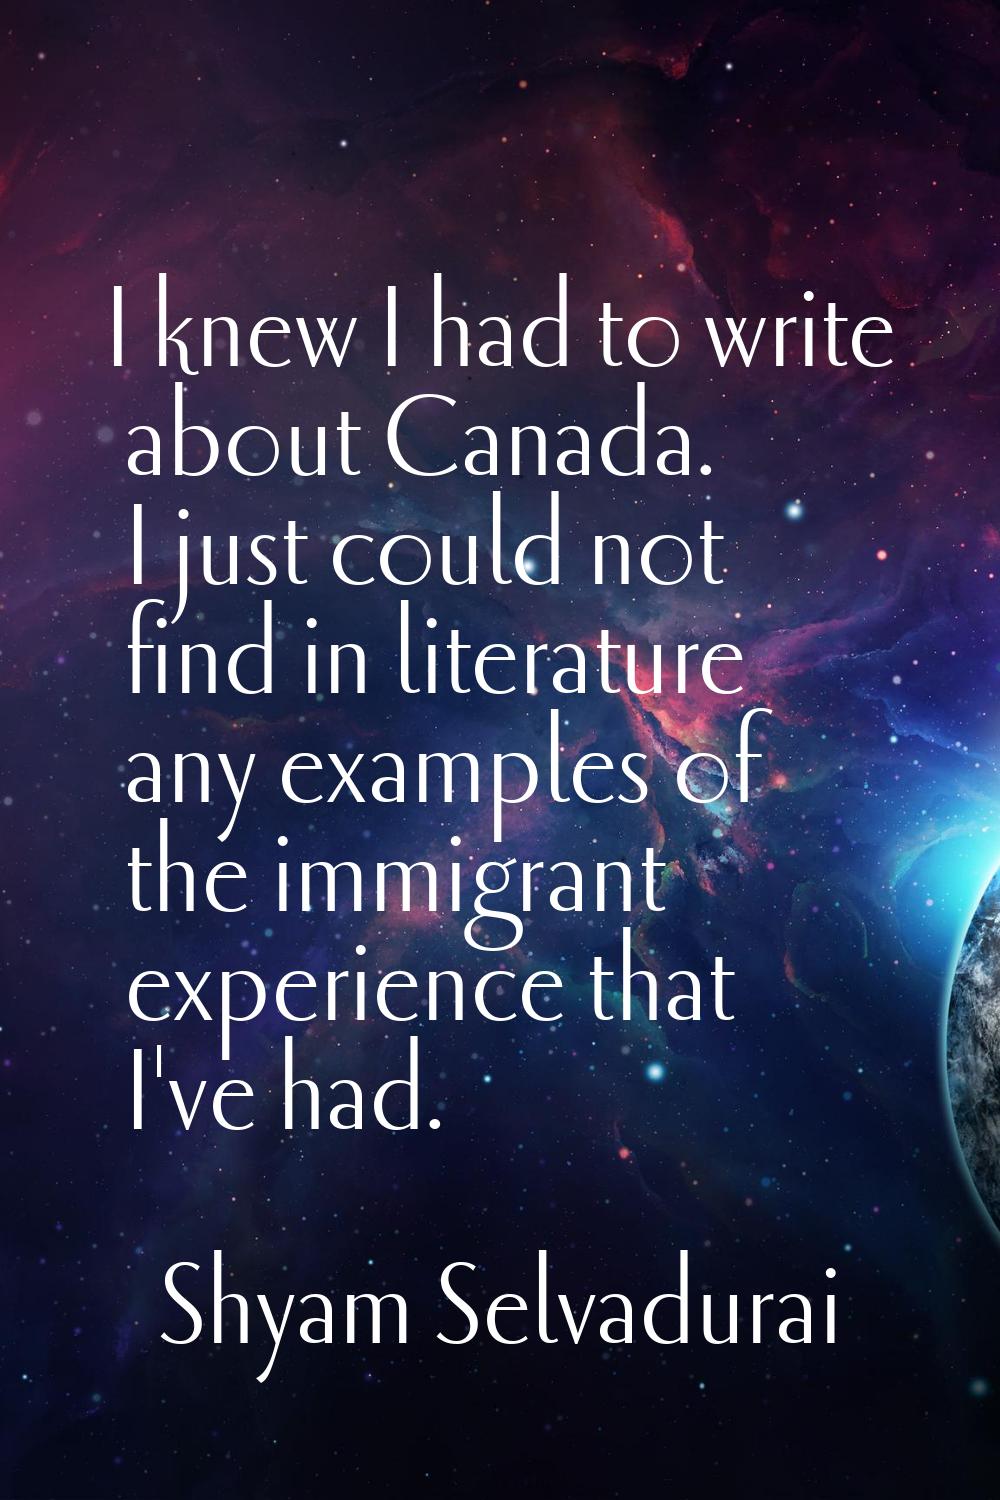 I knew I had to write about Canada. I just could not find in literature any examples of the immigra